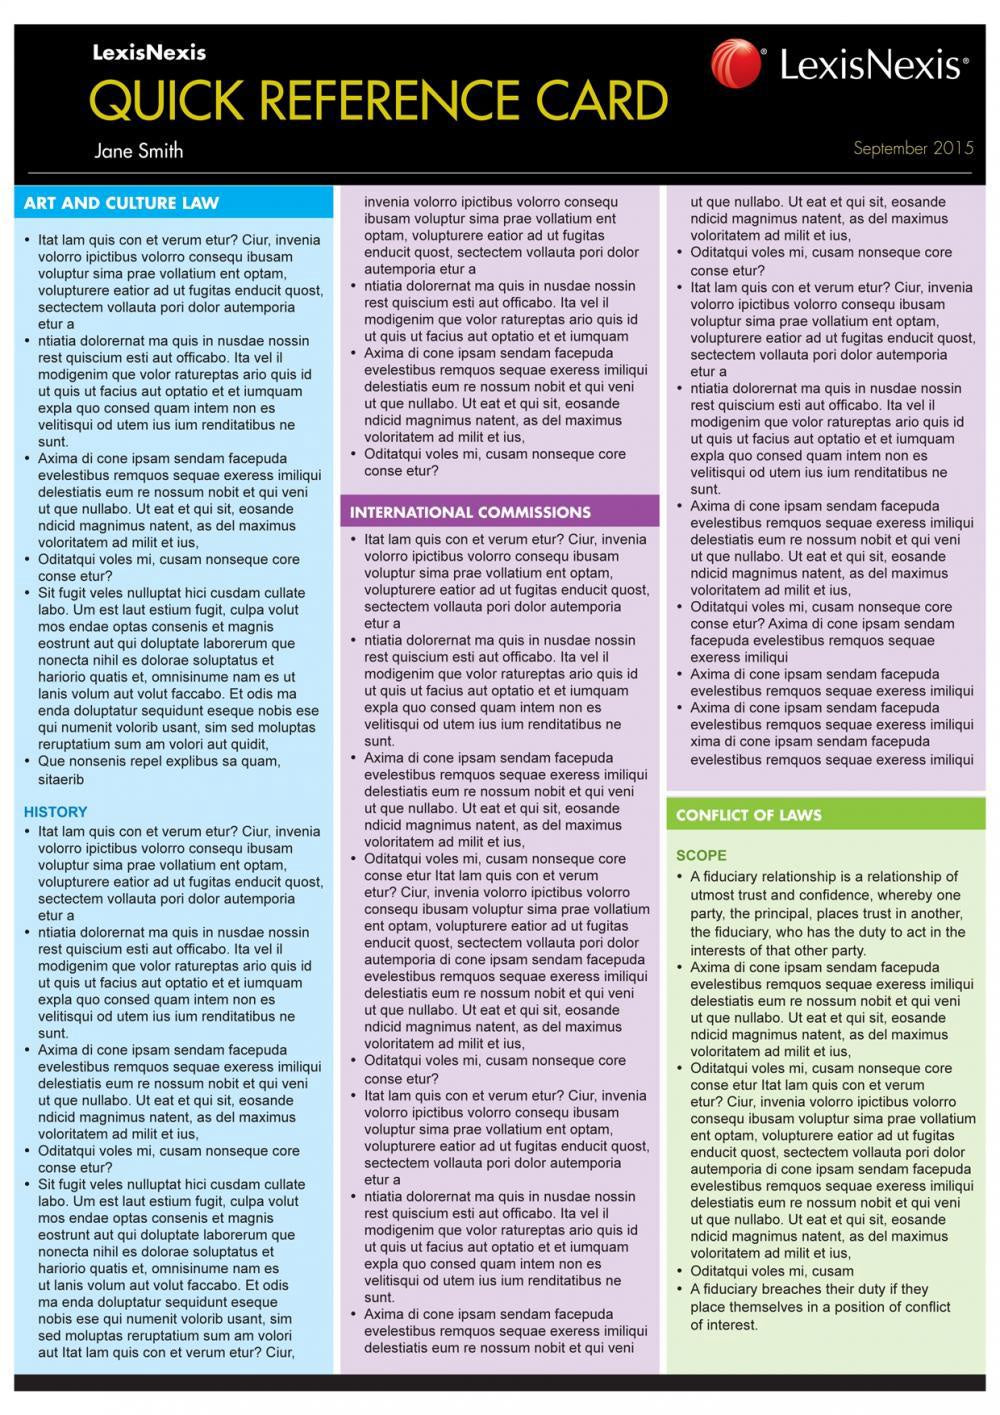 REAL PROPERTY LAW QUICK REFERENCE CARD 3RD EDITION